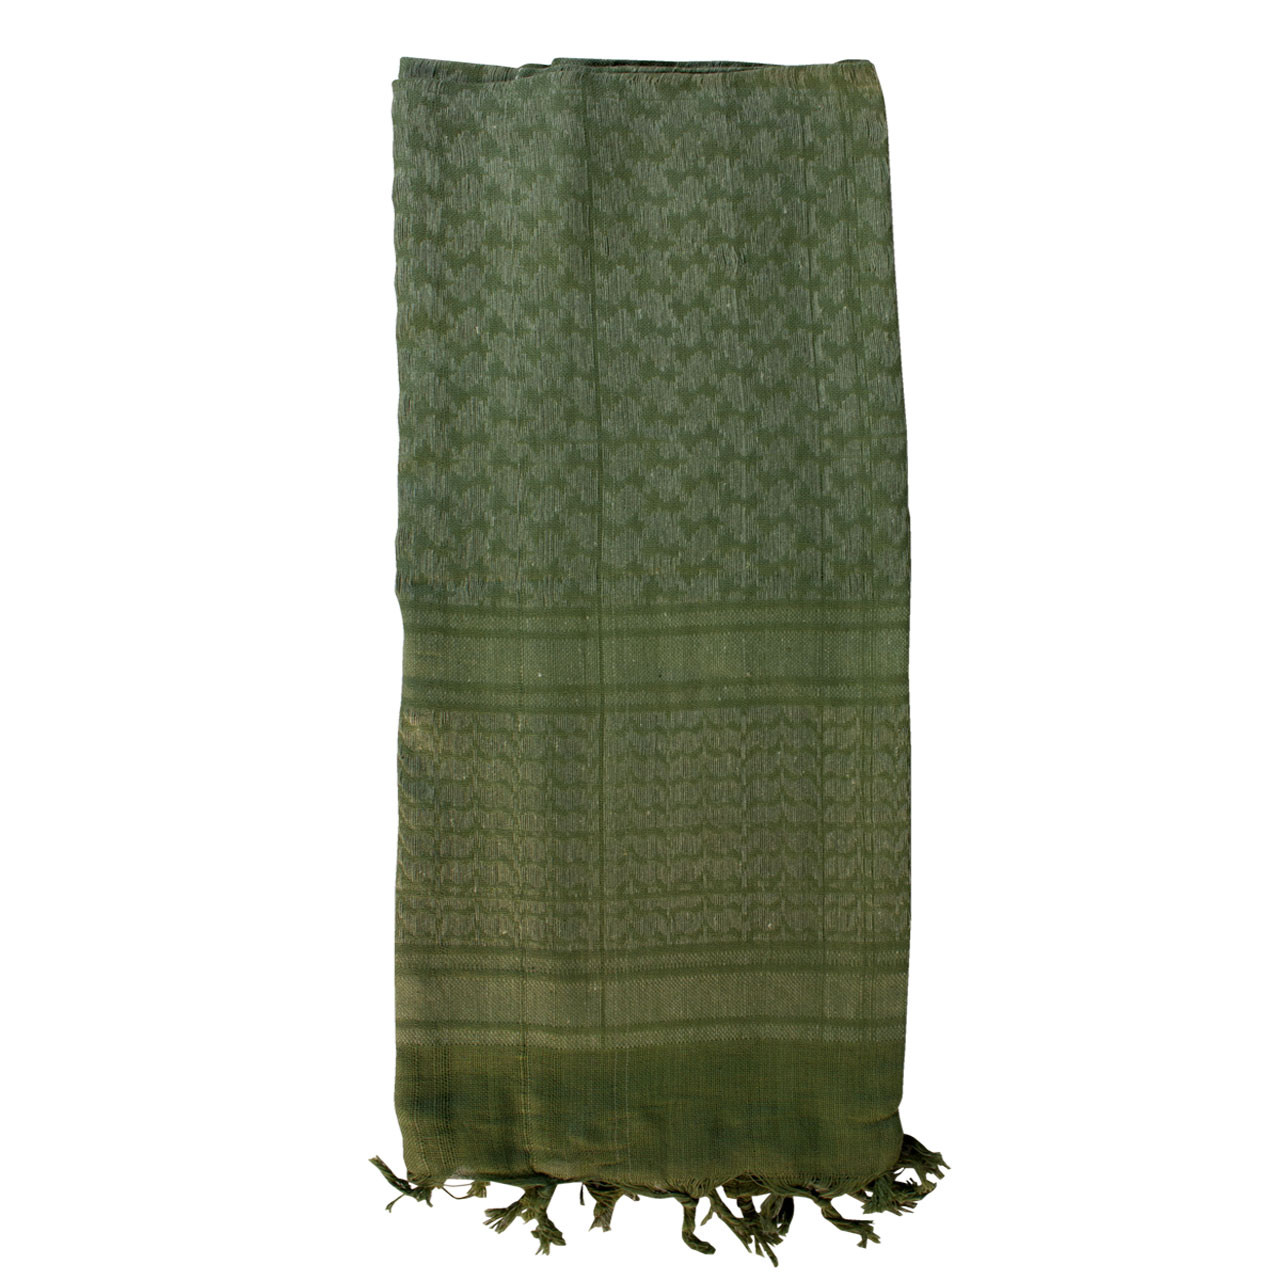 Shemagh Head Wrap - Olive Drab